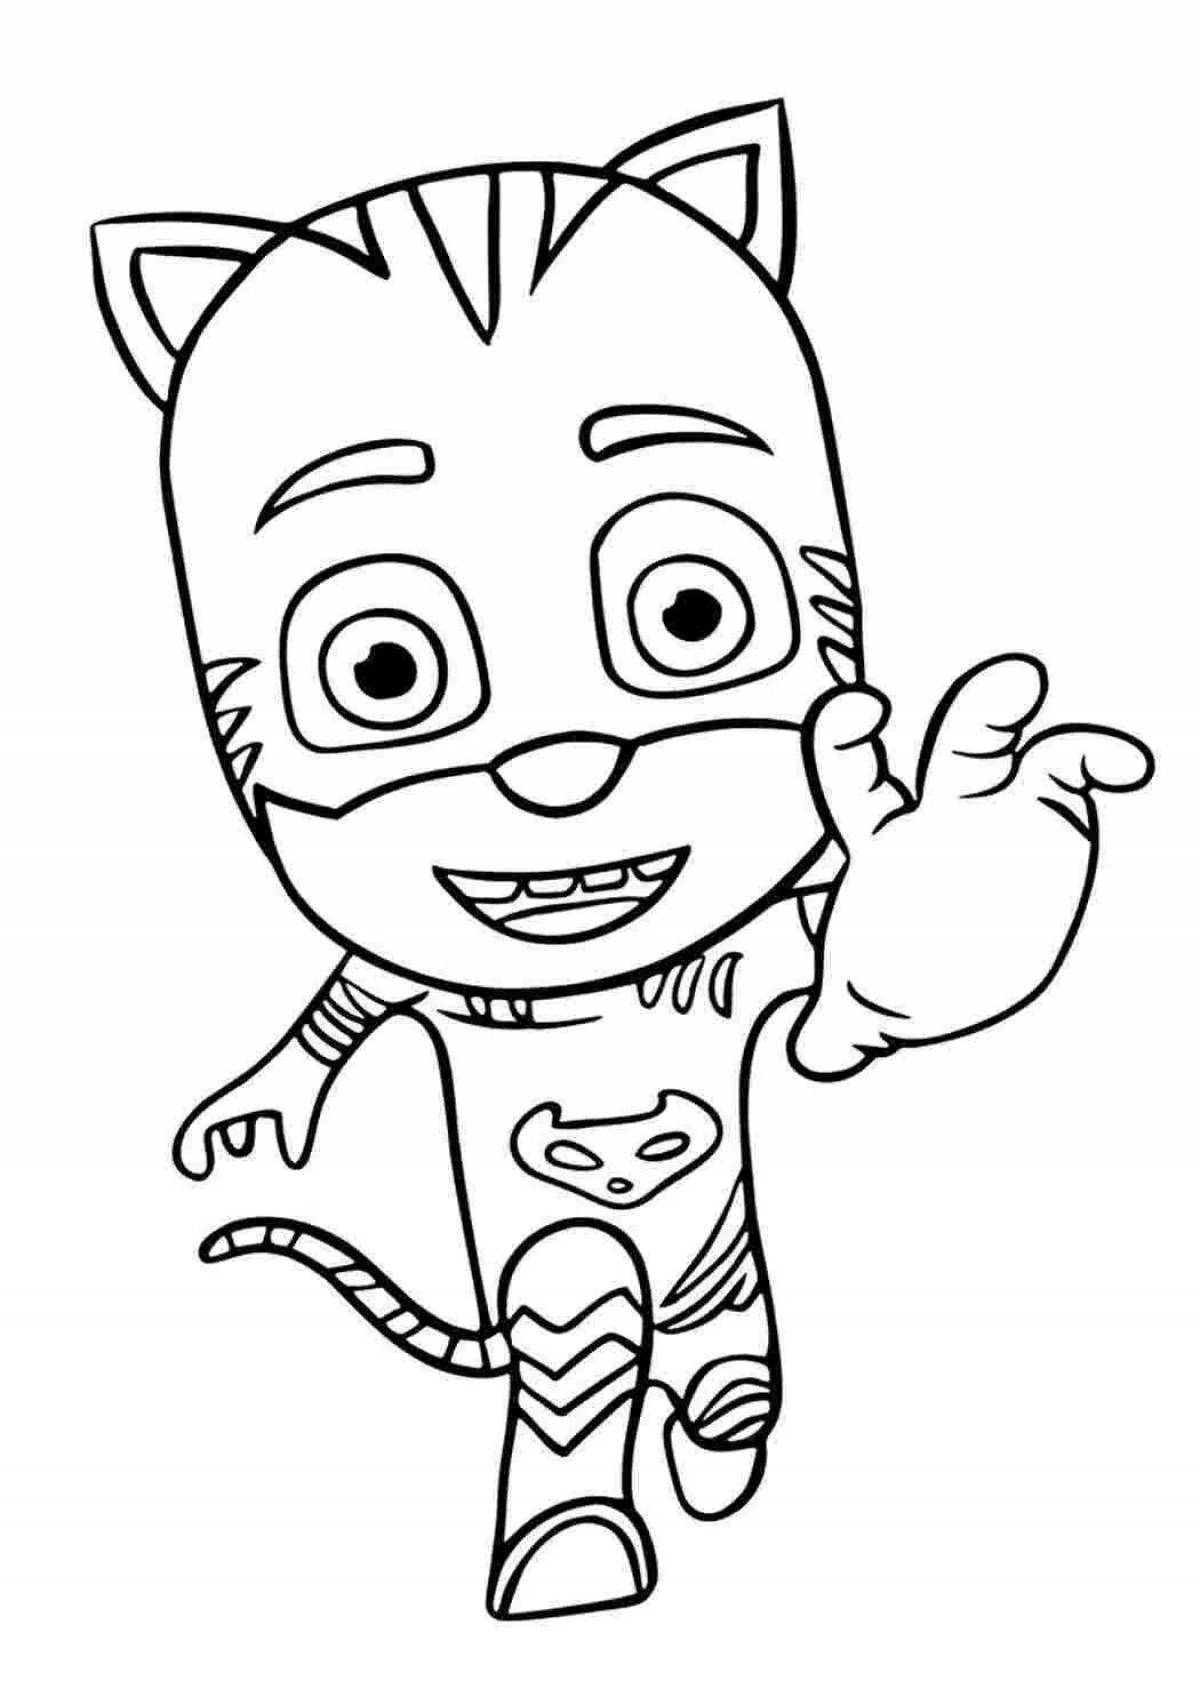 Run for gold coloring page